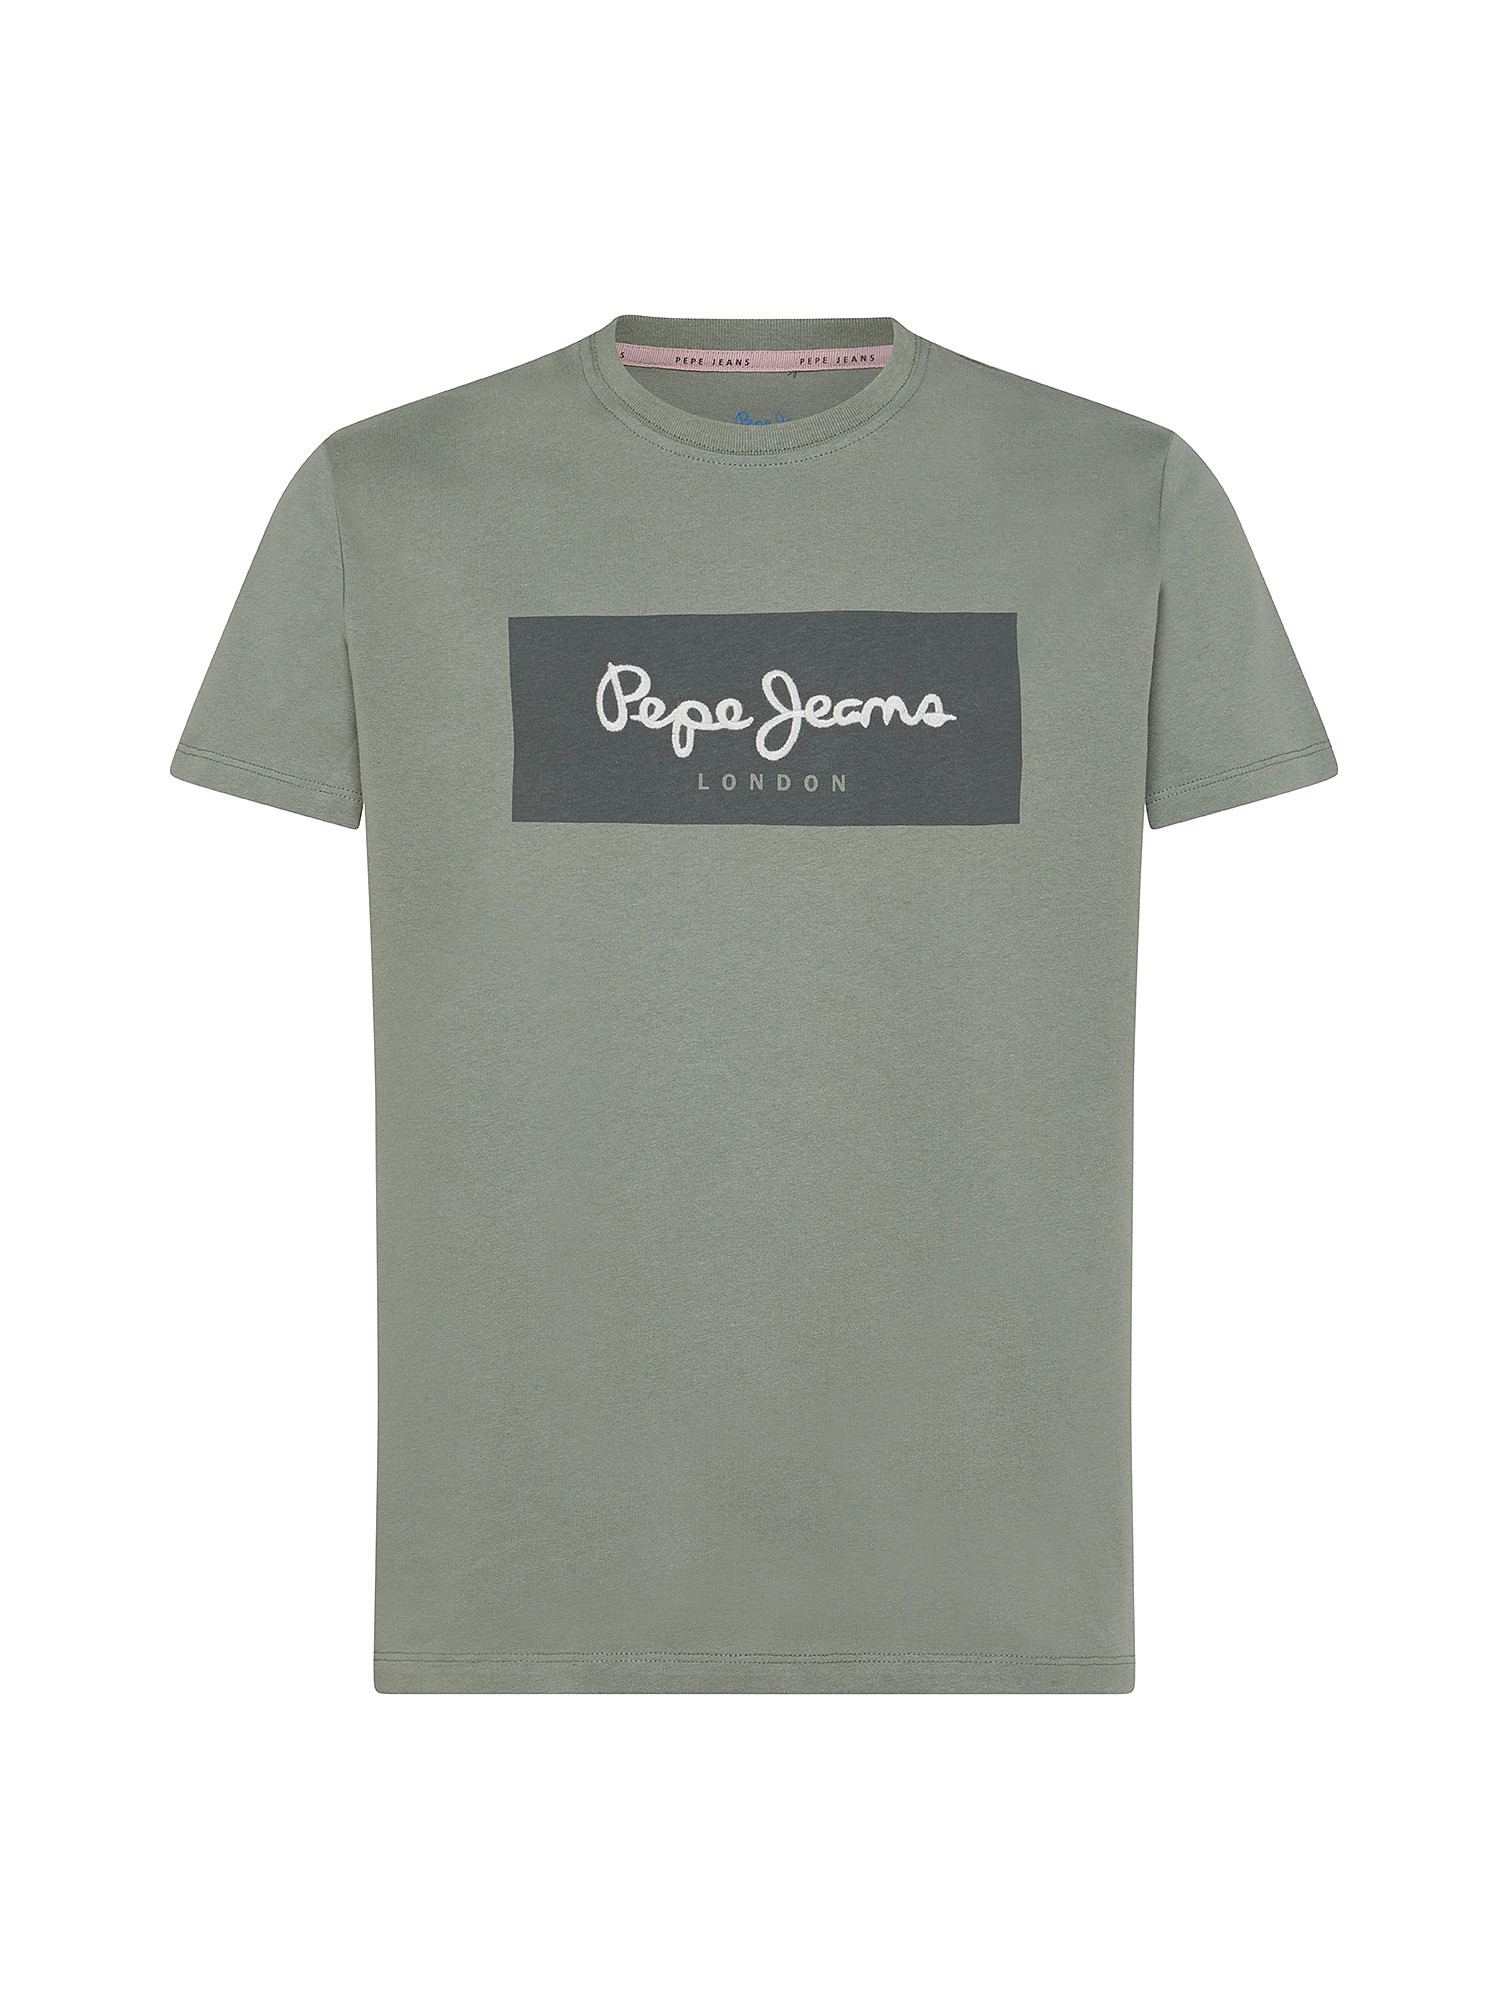 Pepe Jeans - T-shirt con logo in cotone, Verde chiaro, large image number 0